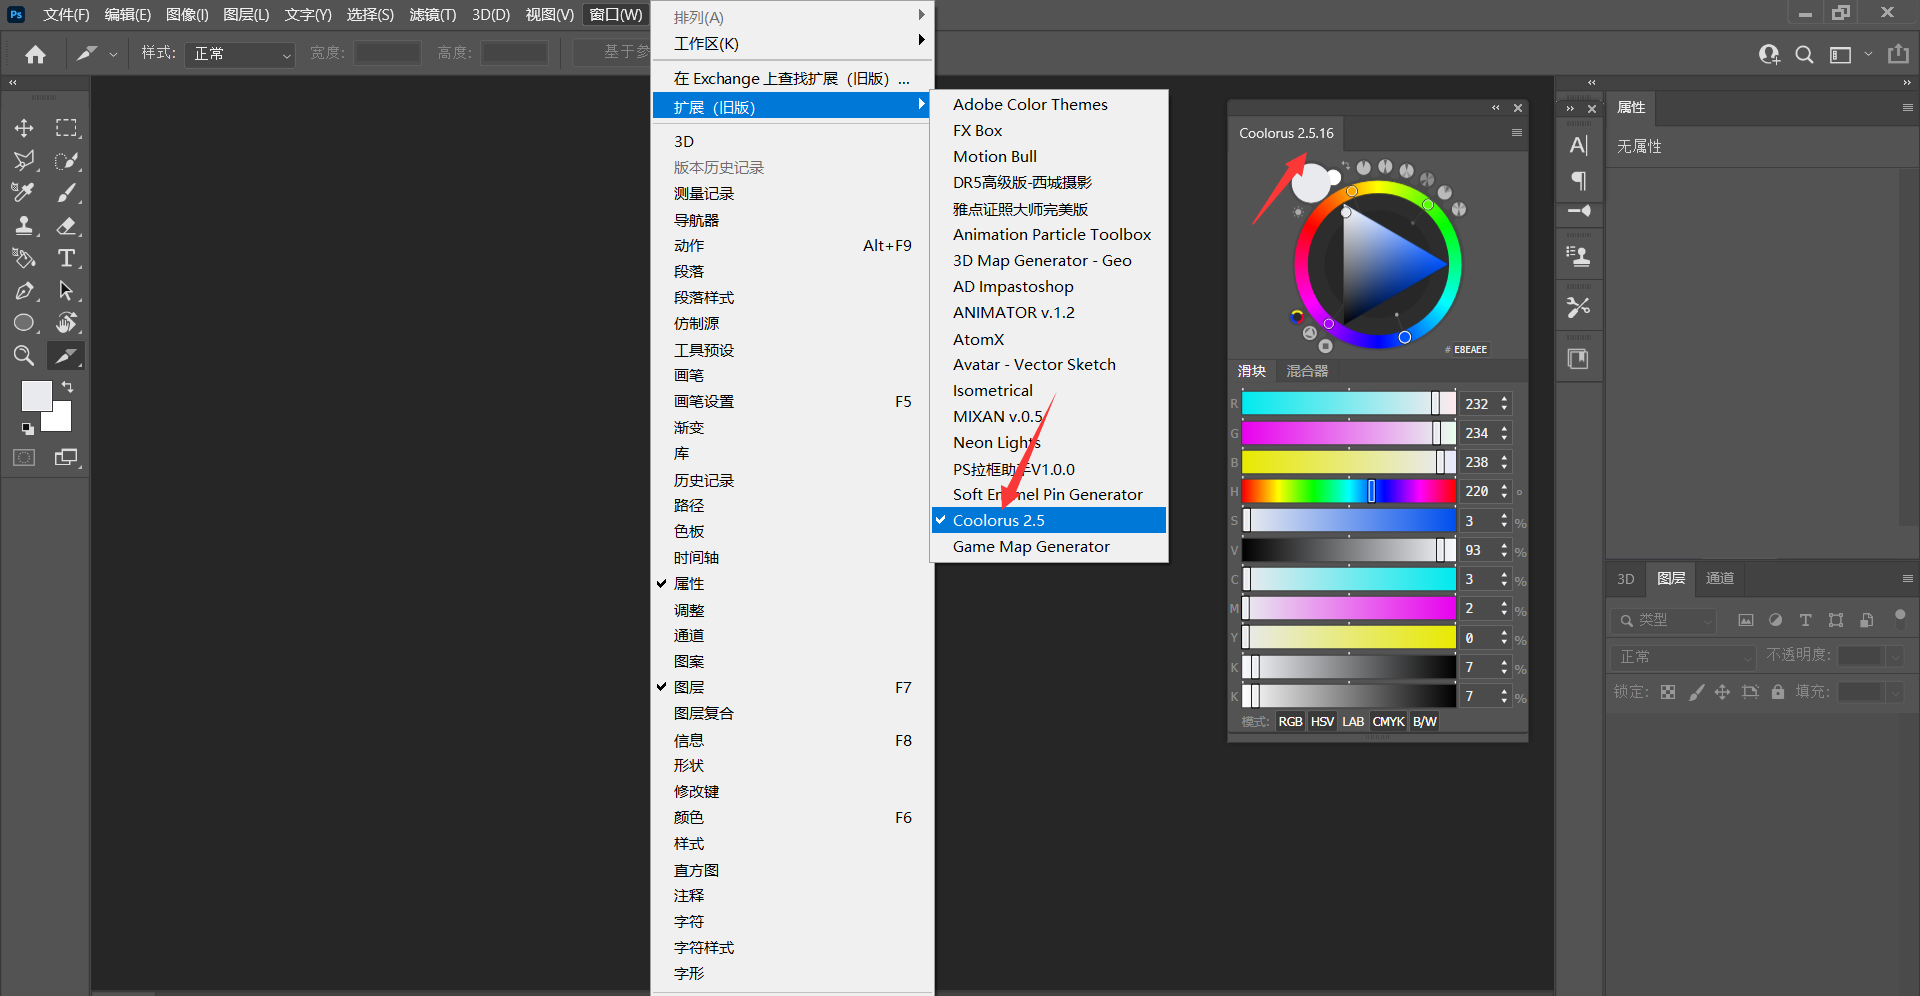 PS色环配色插件破解版 Coolorus V2.5.16 For Photopshop CC 2014-2021 Win（4397）图层云1